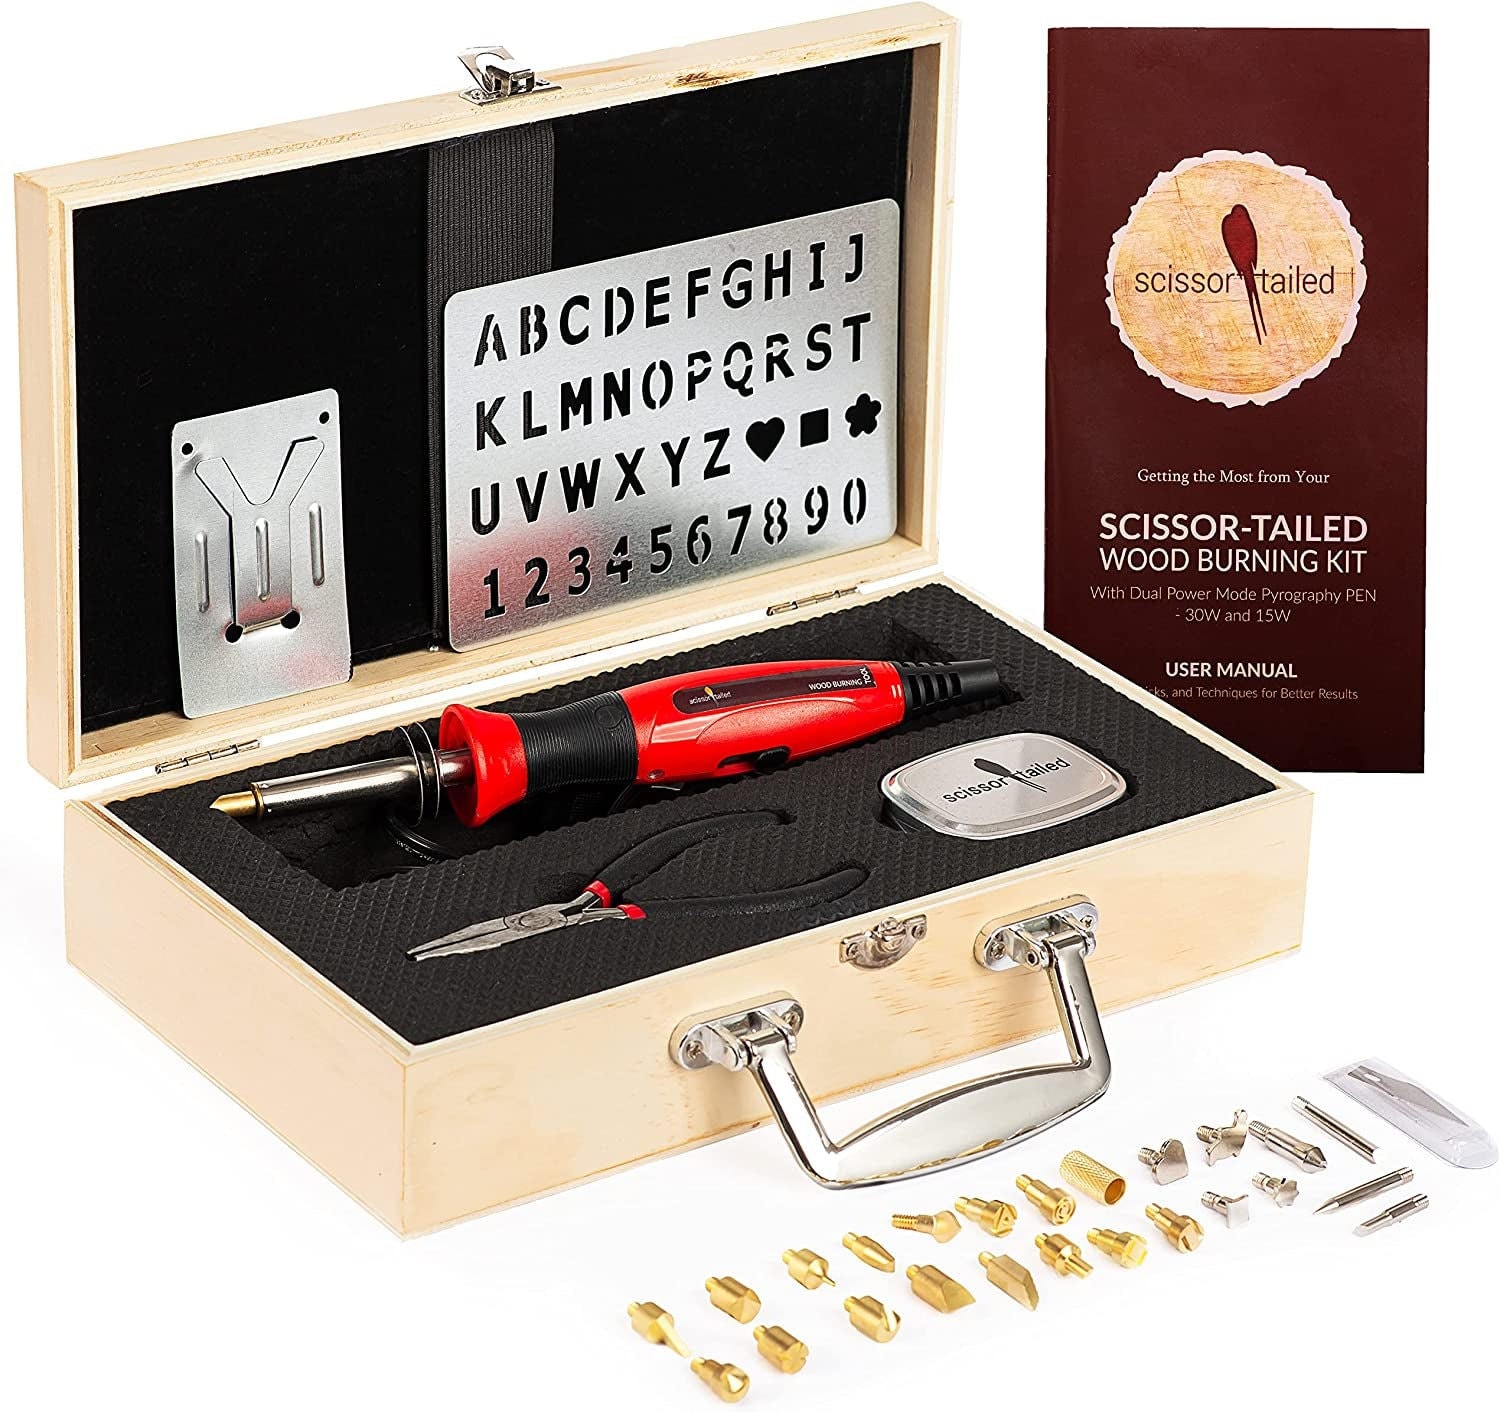 The Best Premium Wood Burning Kit 101 Pieces Wood Burning Tool With Switch  Adjustable Temperature Wood Burner Kit Pyrography FREE Shipping 